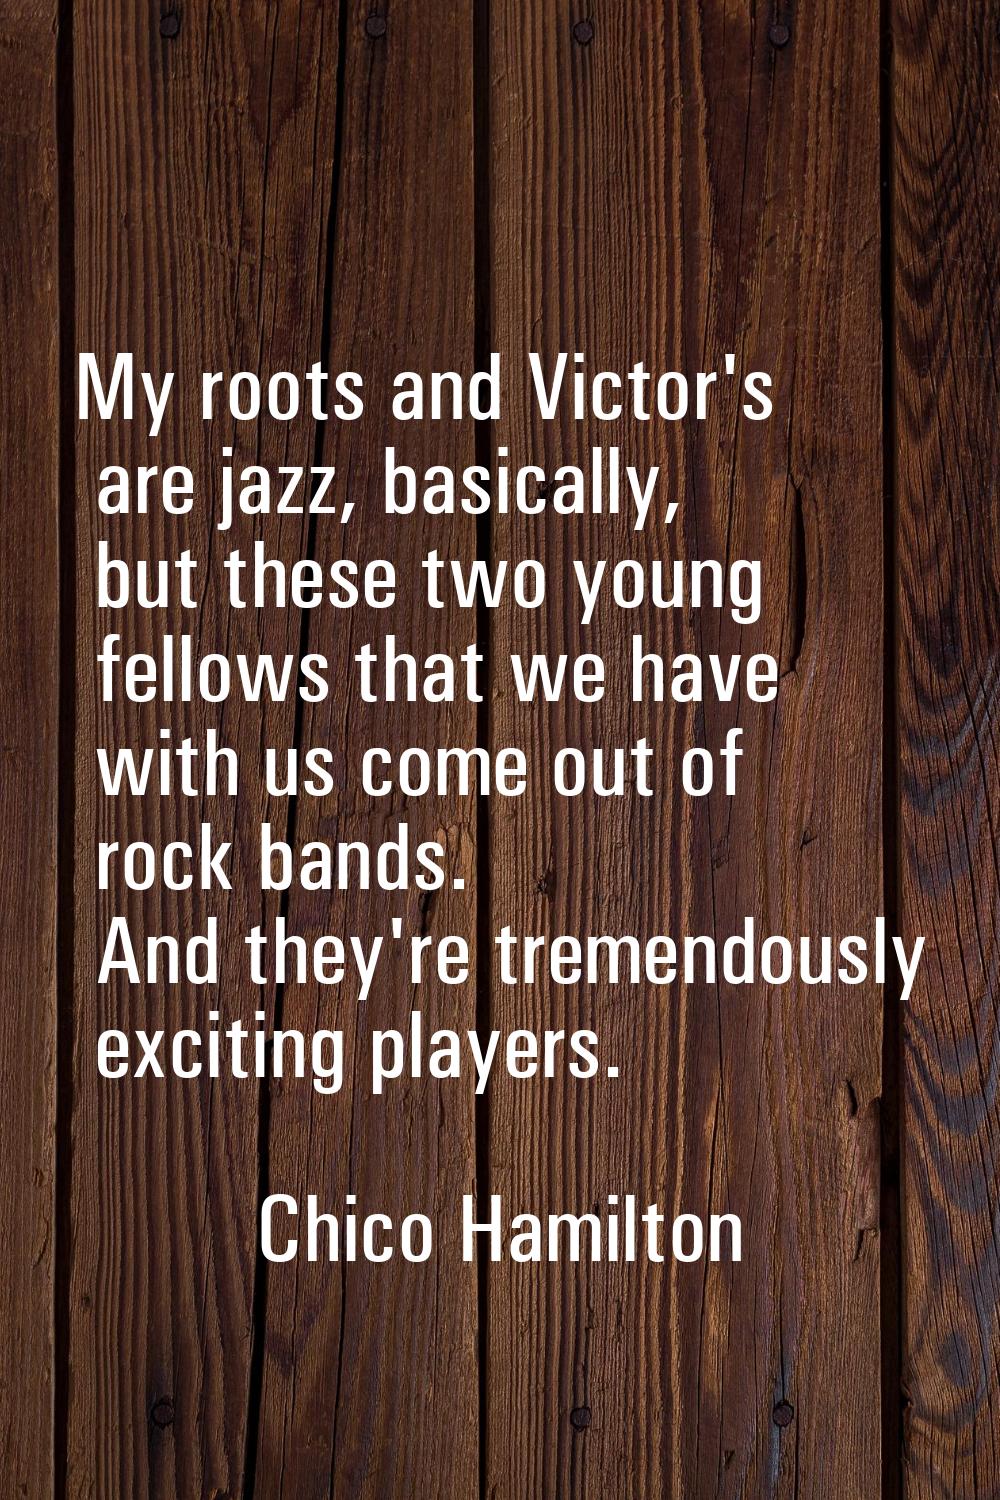 My roots and Victor's are jazz, basically, but these two young fellows that we have with us come ou